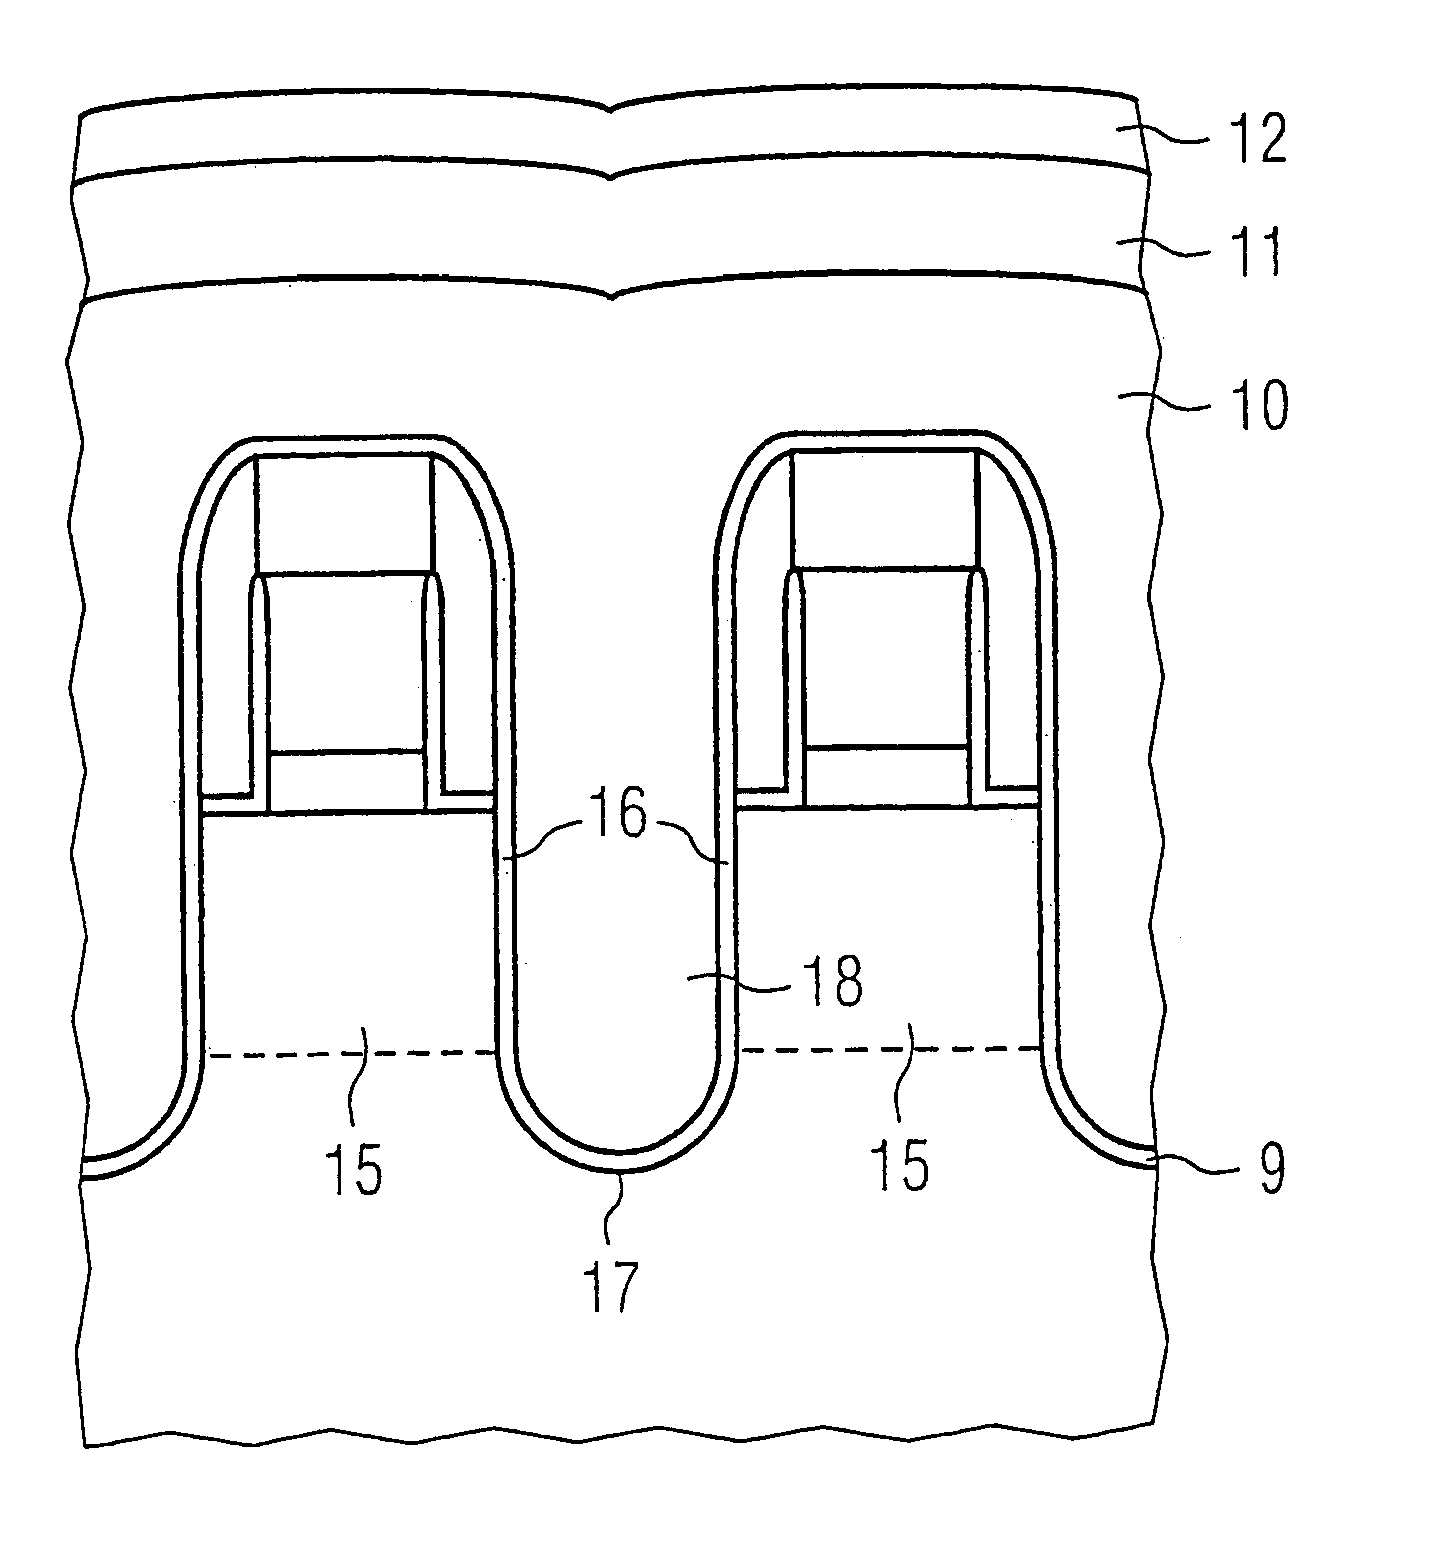 Method for fabricating NROM memory cells with trench transistors